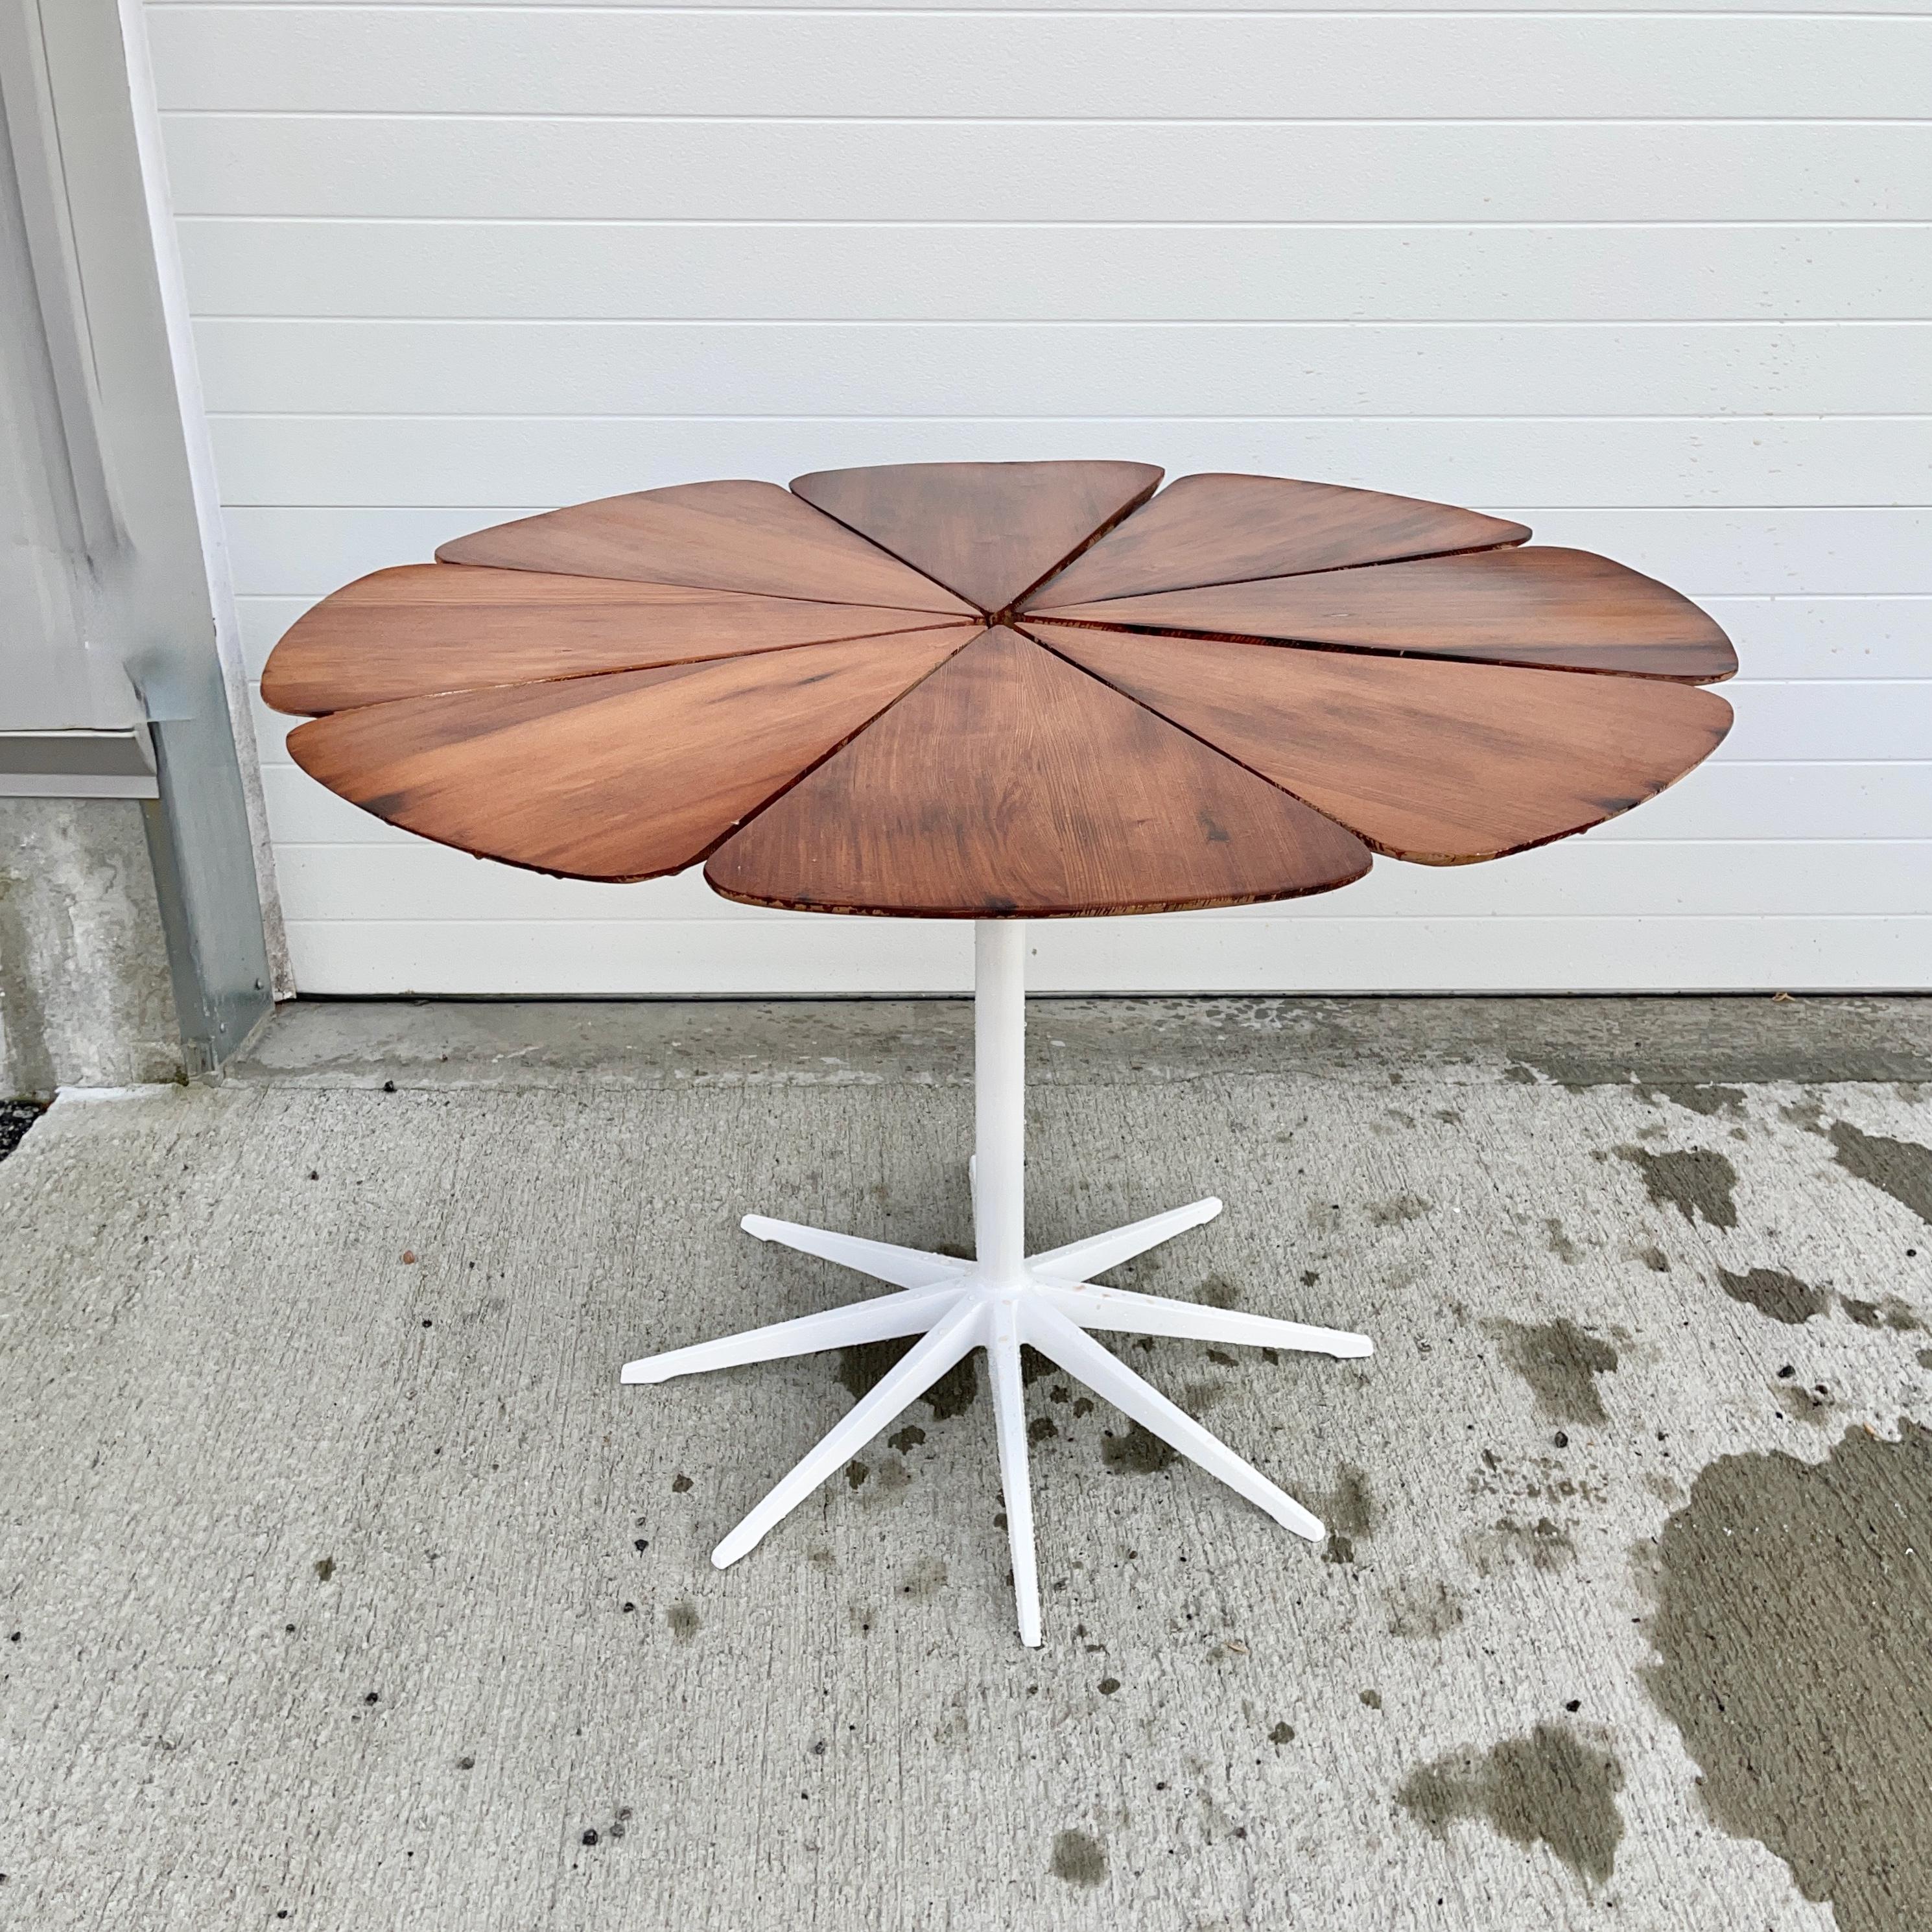 1961 Petal Dining Table by Richard Schultz for Knoll in California Redwood For Sale 3